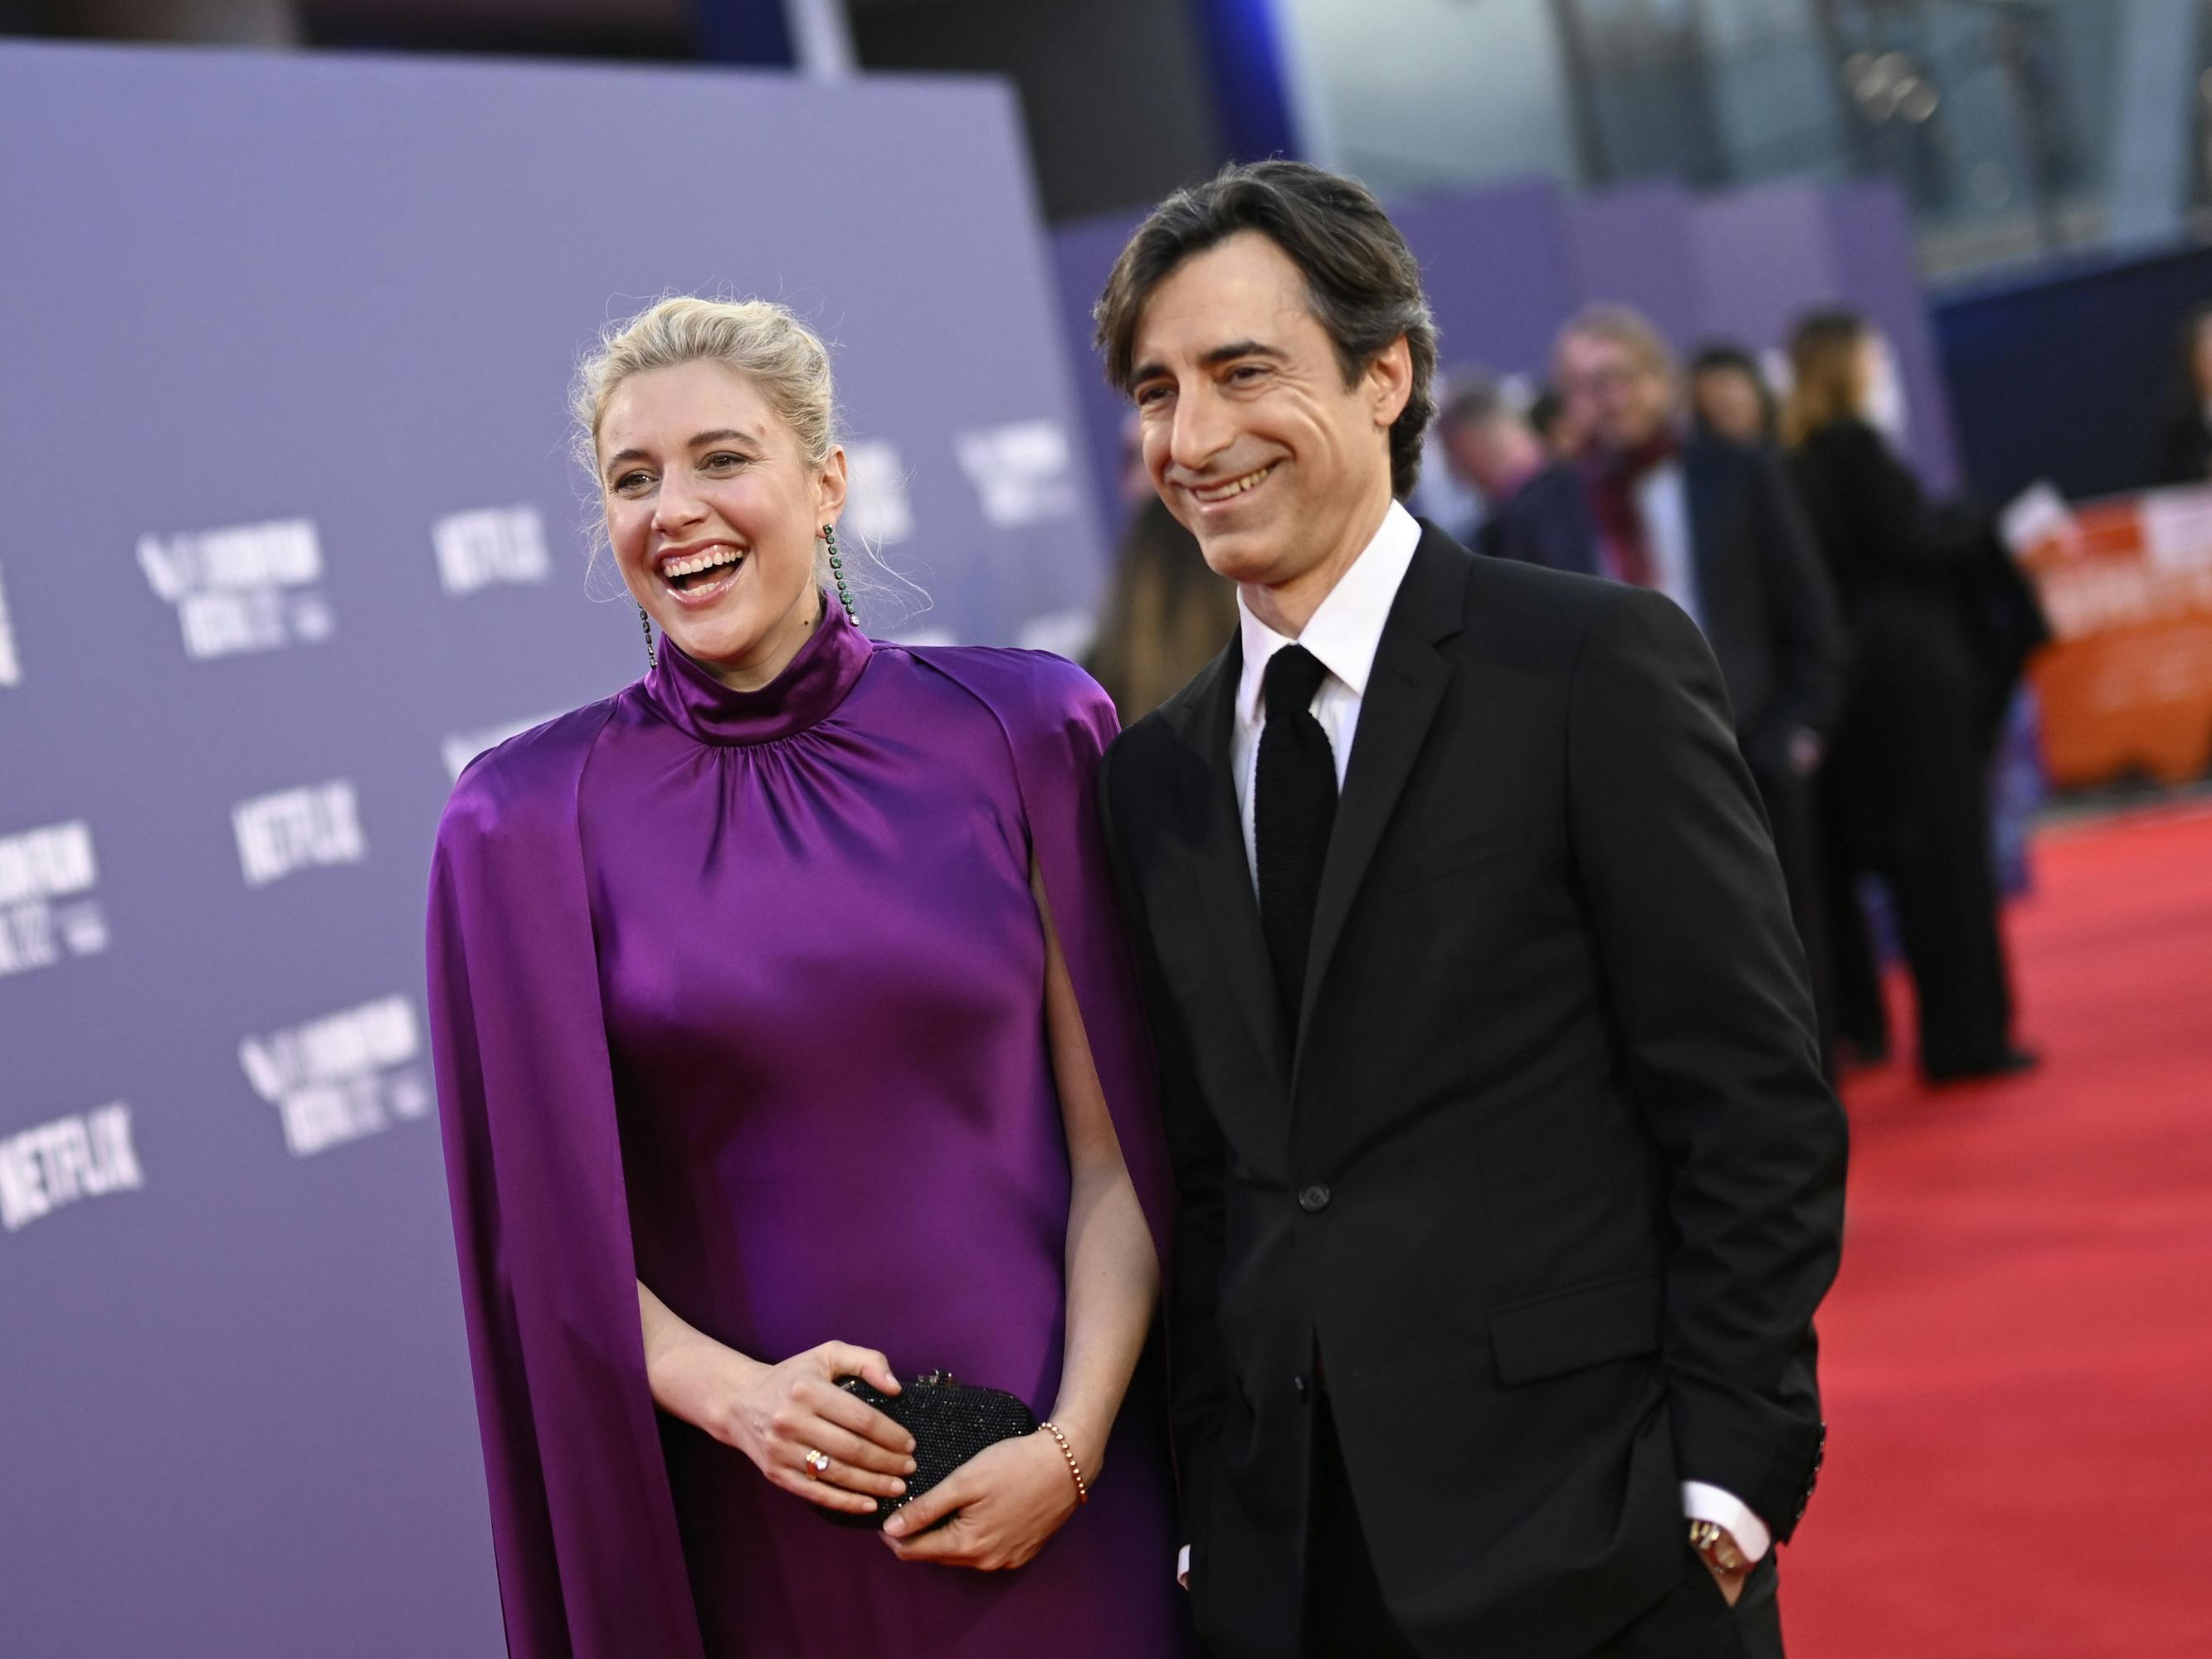 Greta Gerwig and Noah Baumbach stand on the red carpet. Gerwig wears a purple dress and holds a black clutch and Baumbach wears a dark suit and white shirt.